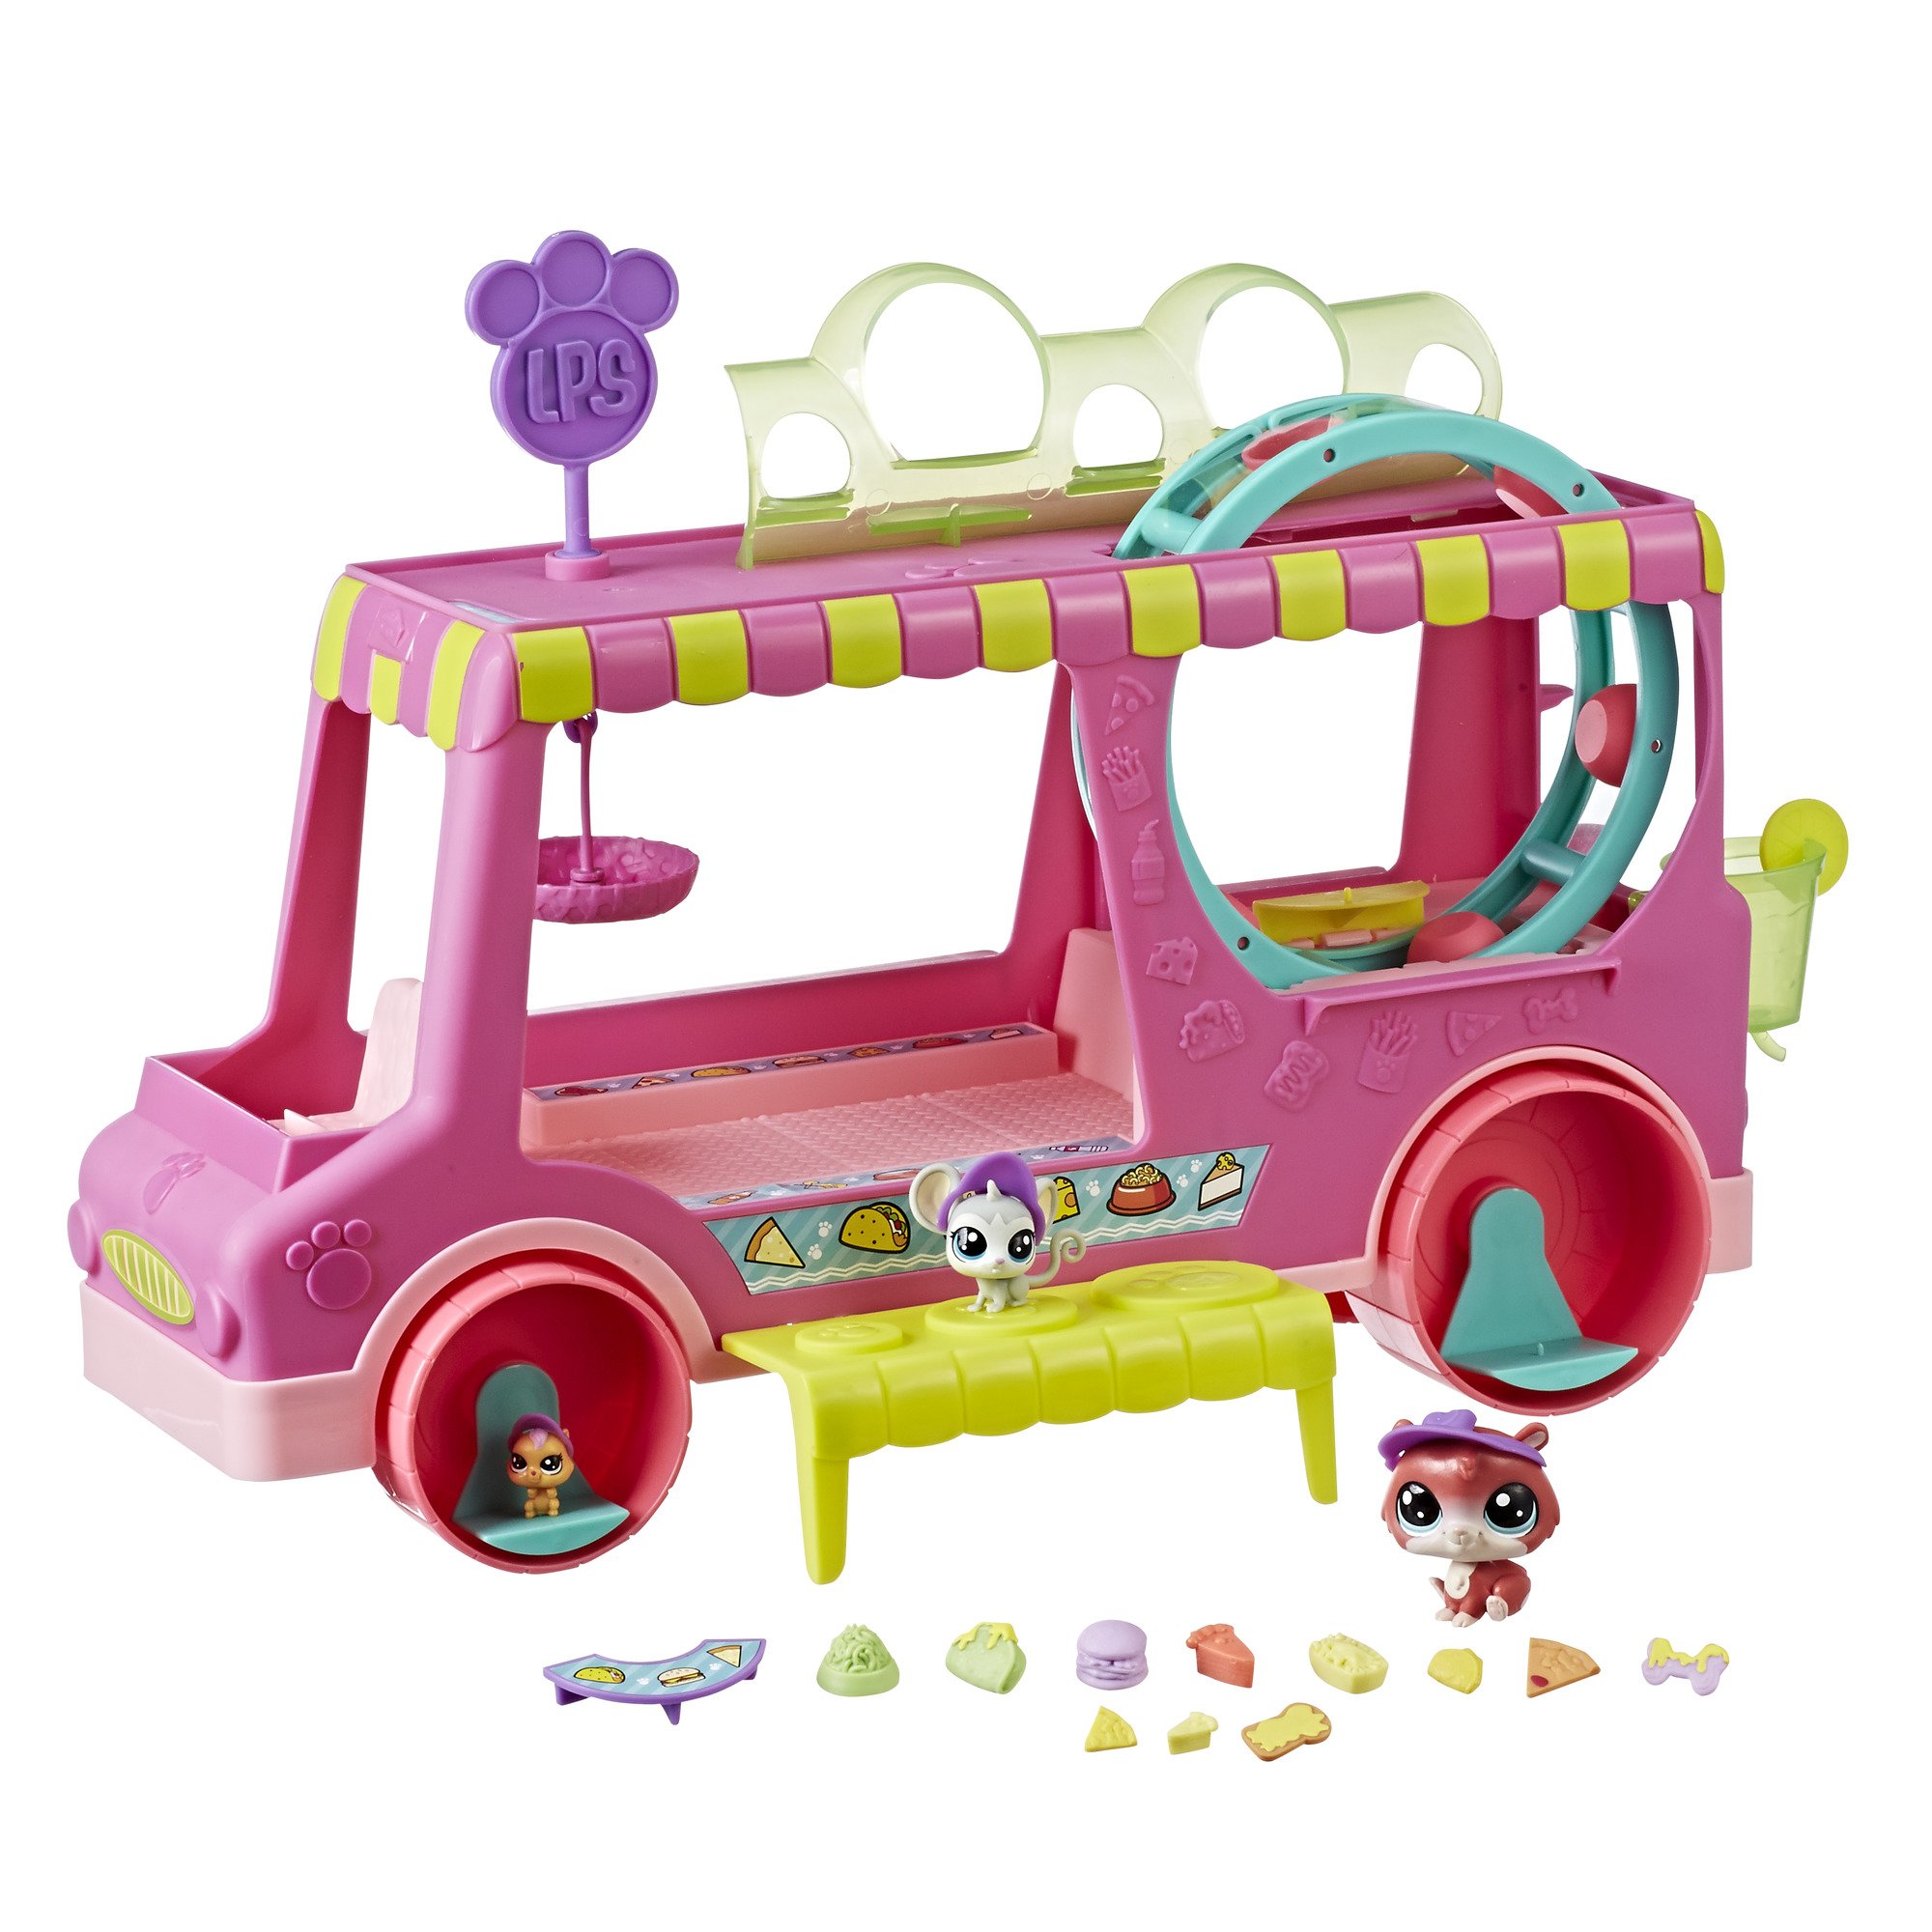 Littlest Pet Shop Tr’eats Truck Playset Toy, Rolling Wheels, Adult Assembly Required (No Tools Needed), Ages 4 and Up